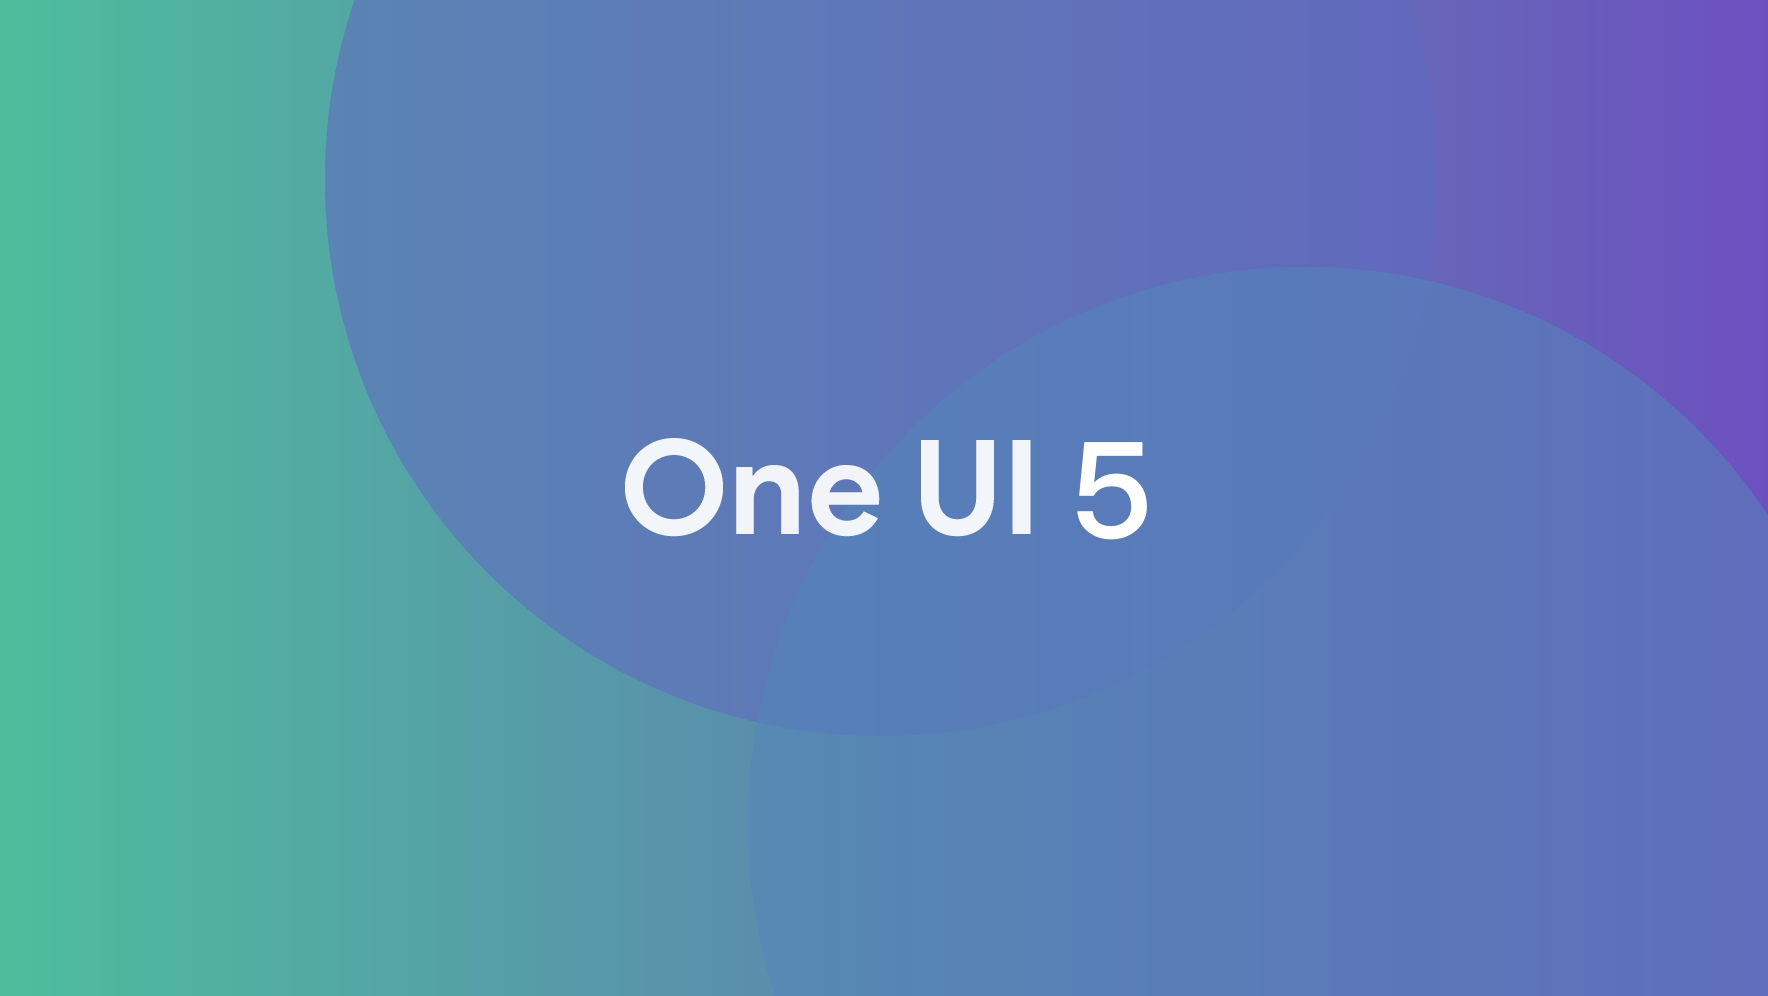 How To Register Samsung One UI 5.0 Beta Program Based On Android 13